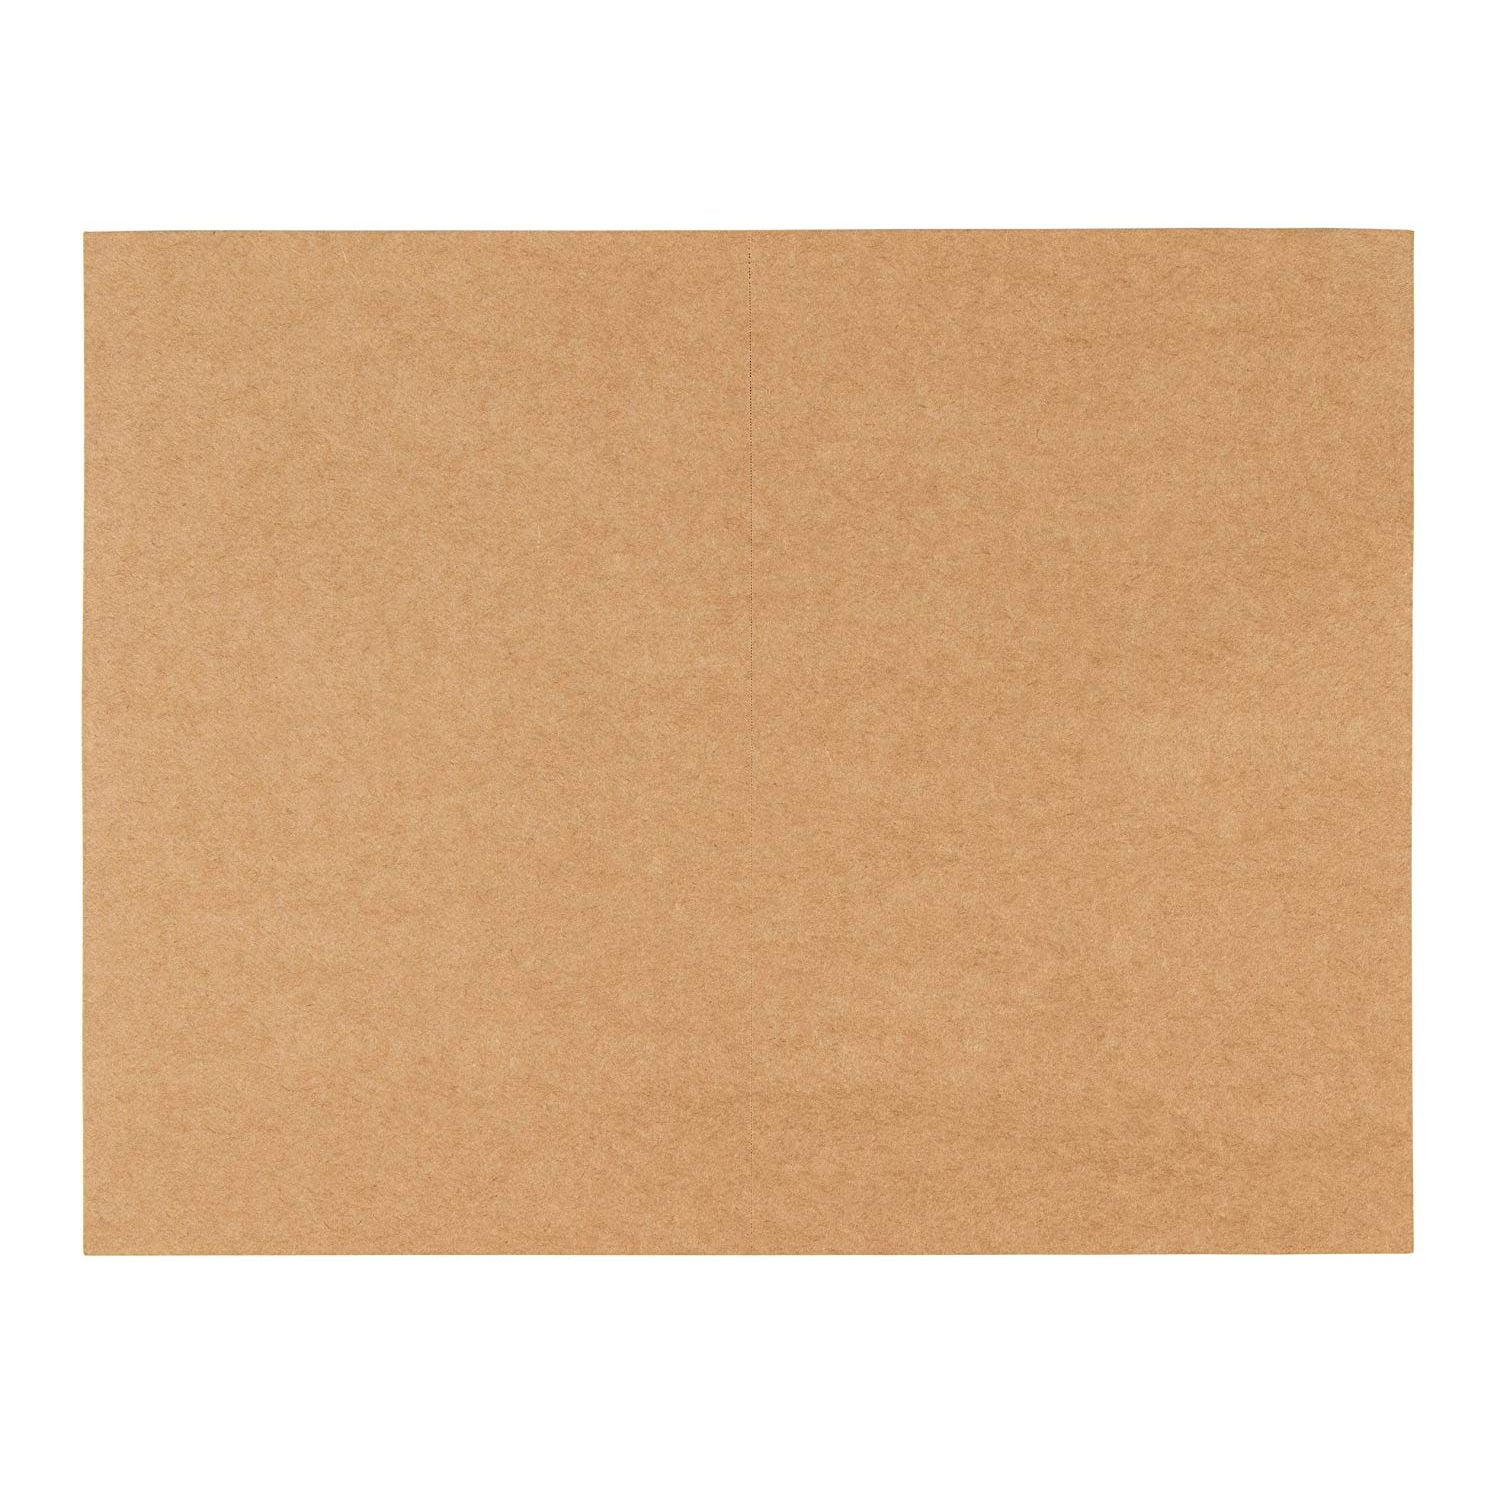 100-Sheet Kraft Paper Postcards Printable Blank Note Cards for Inkjet and Laser Printers 2 Per Page 200 Cards in Total Brown 5.5 x 8.5 Inches Best Paper Greetings Blank Postcards